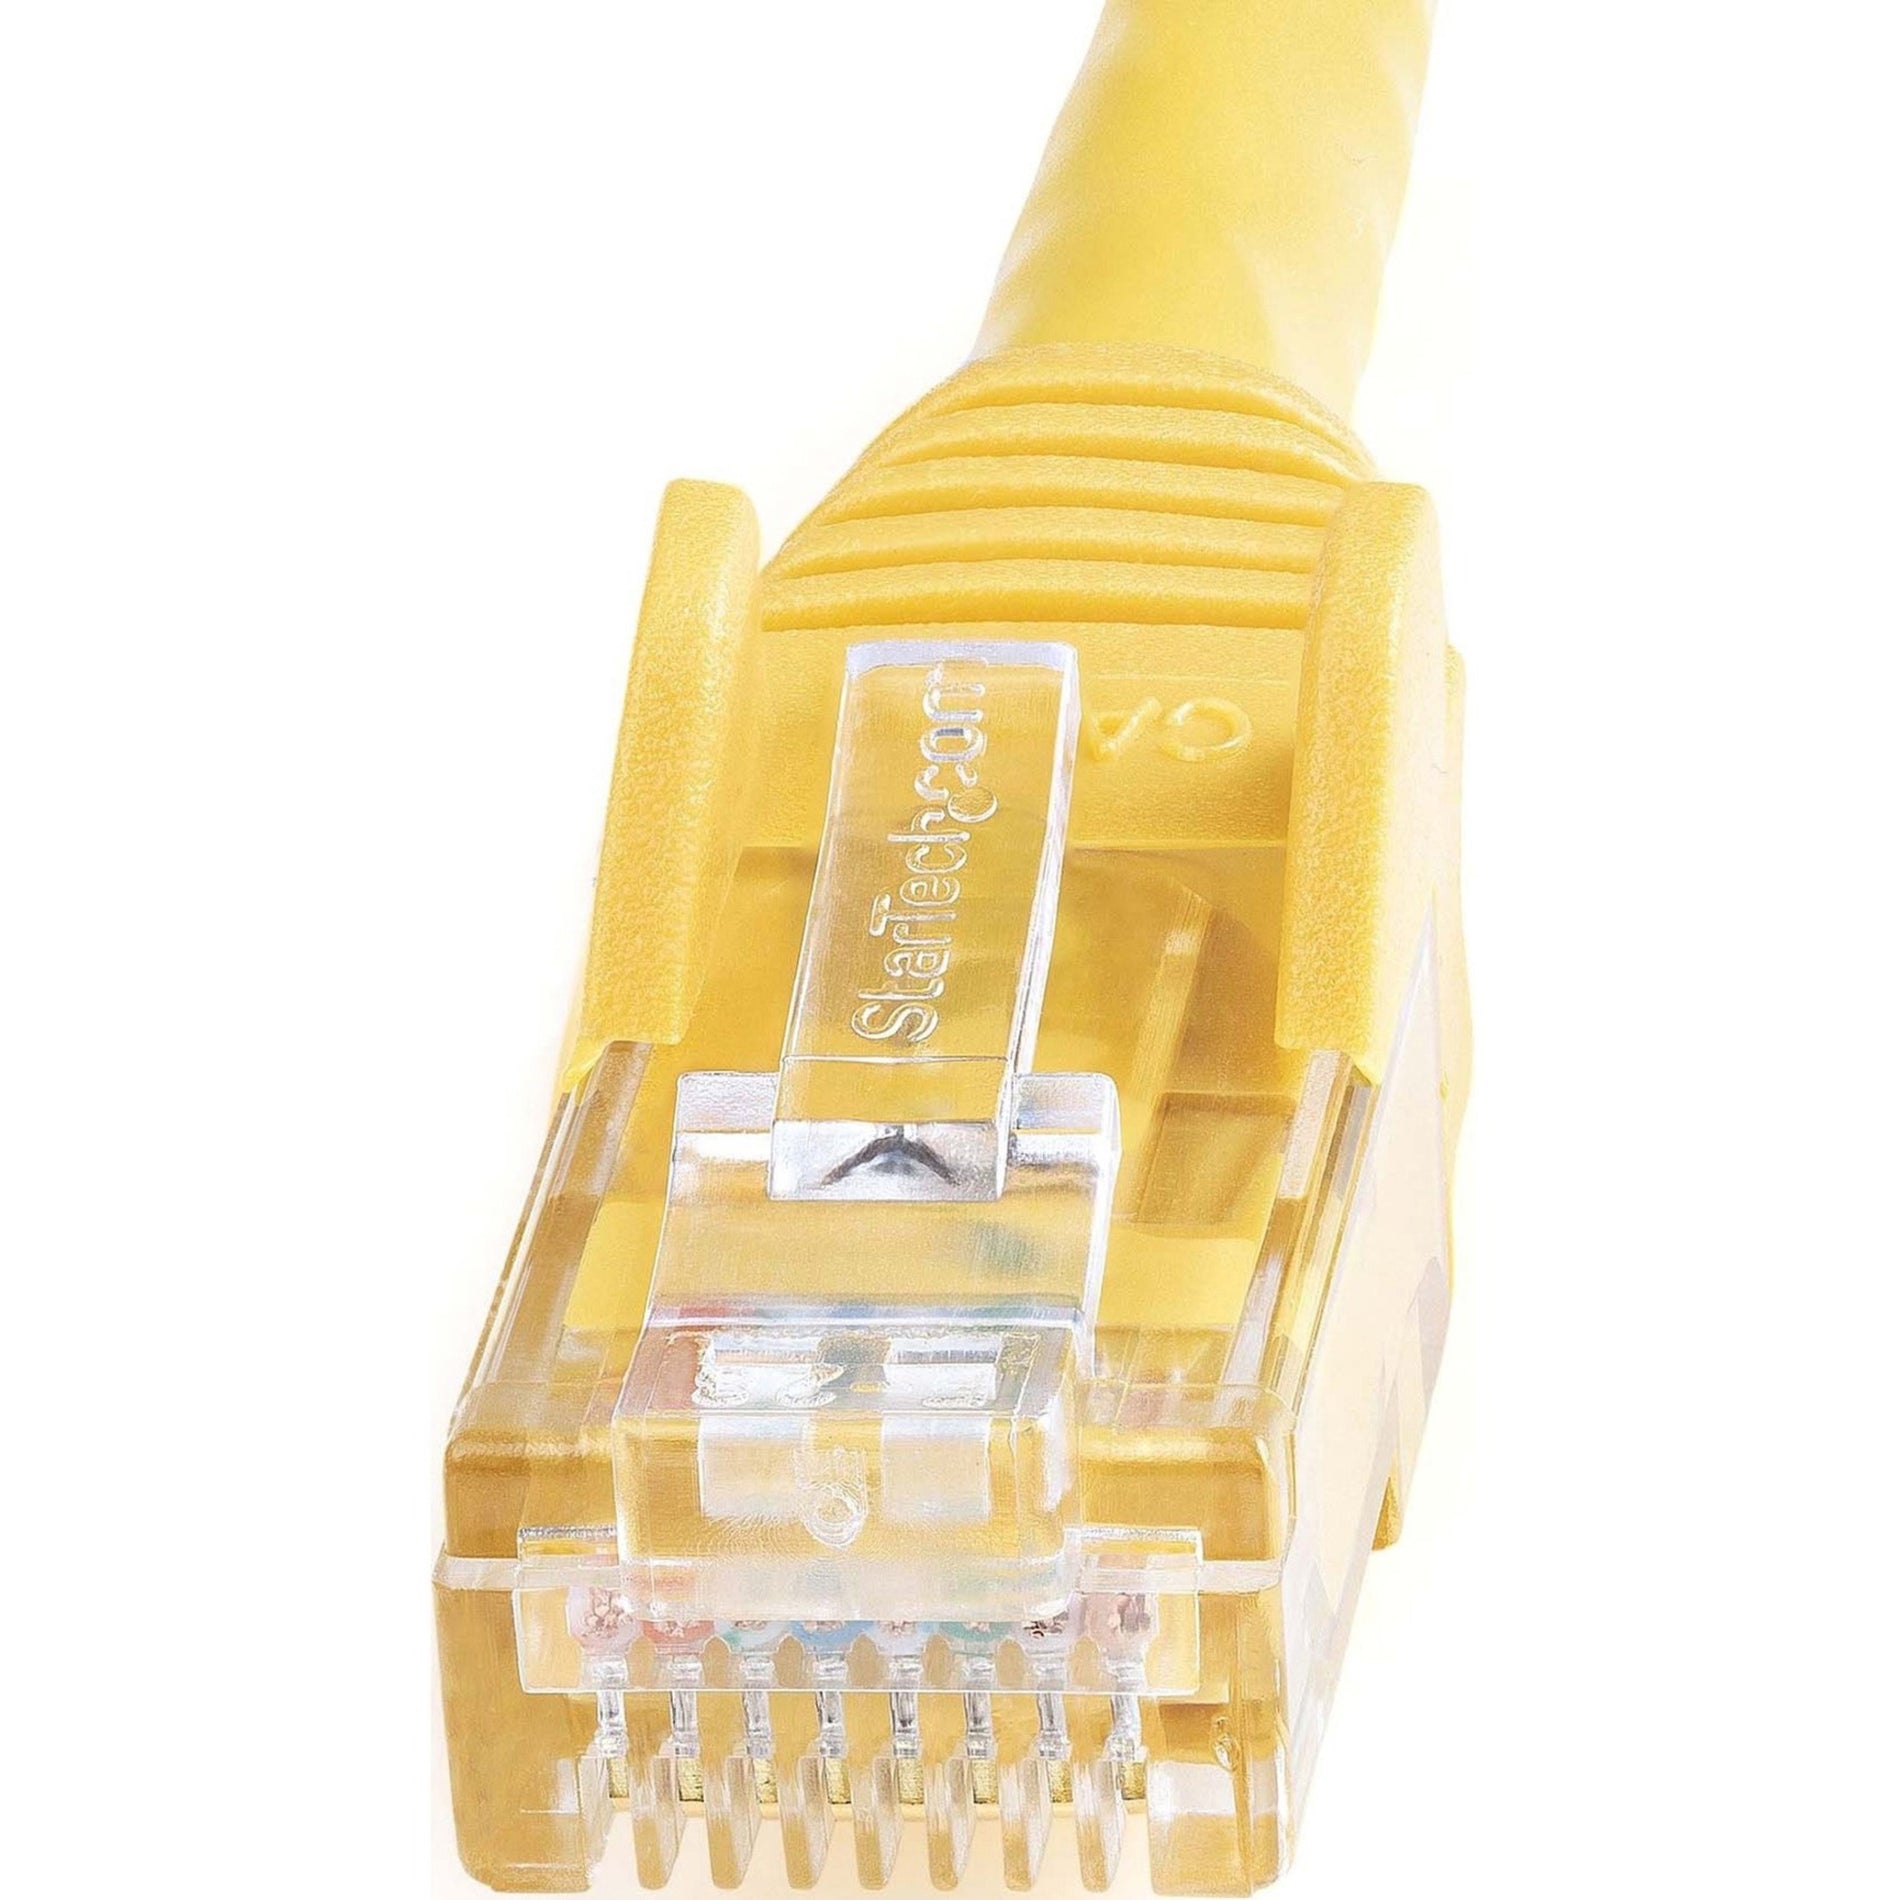 StarTech.com N6PATCH1YL Cat6 Patch Cable, 1ft Yellow Ethernet Cable, Snagless RJ45 Connectors